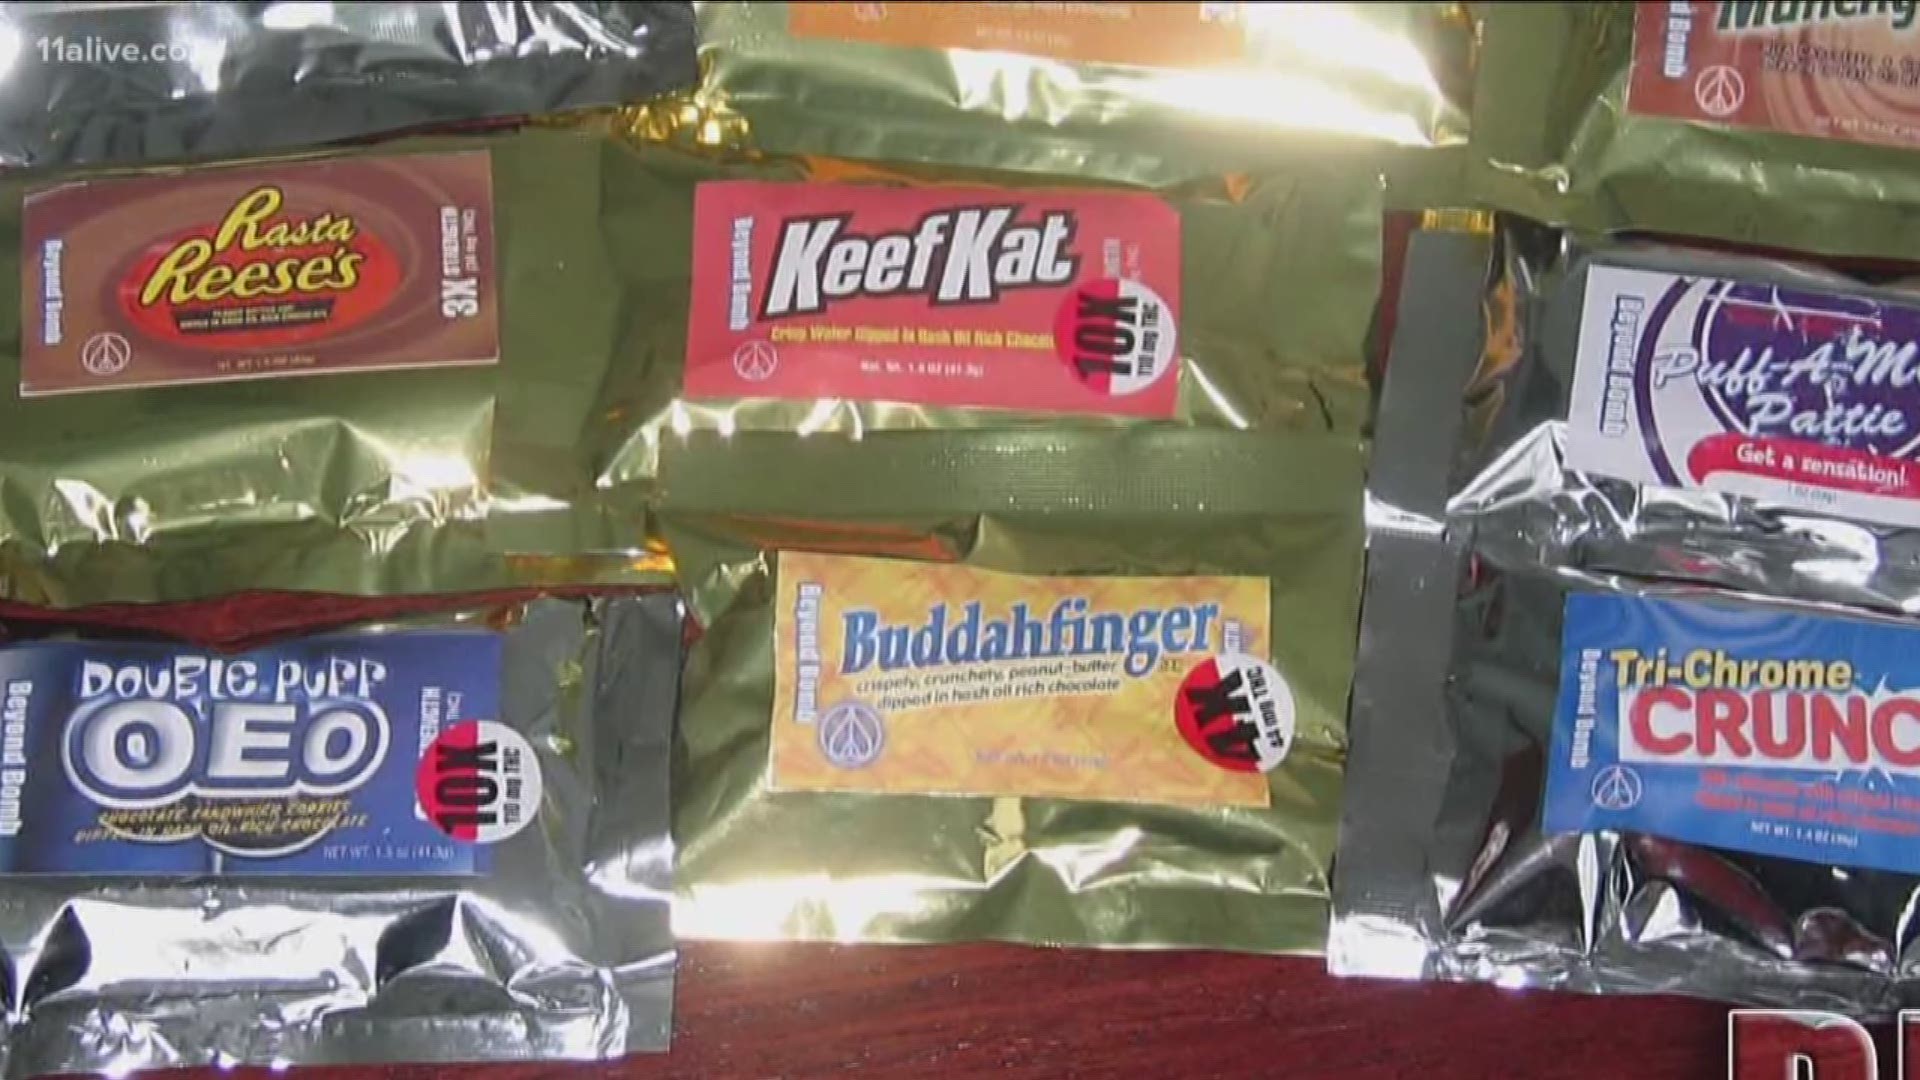 warn parents about drug-laced candy | 11alive.com